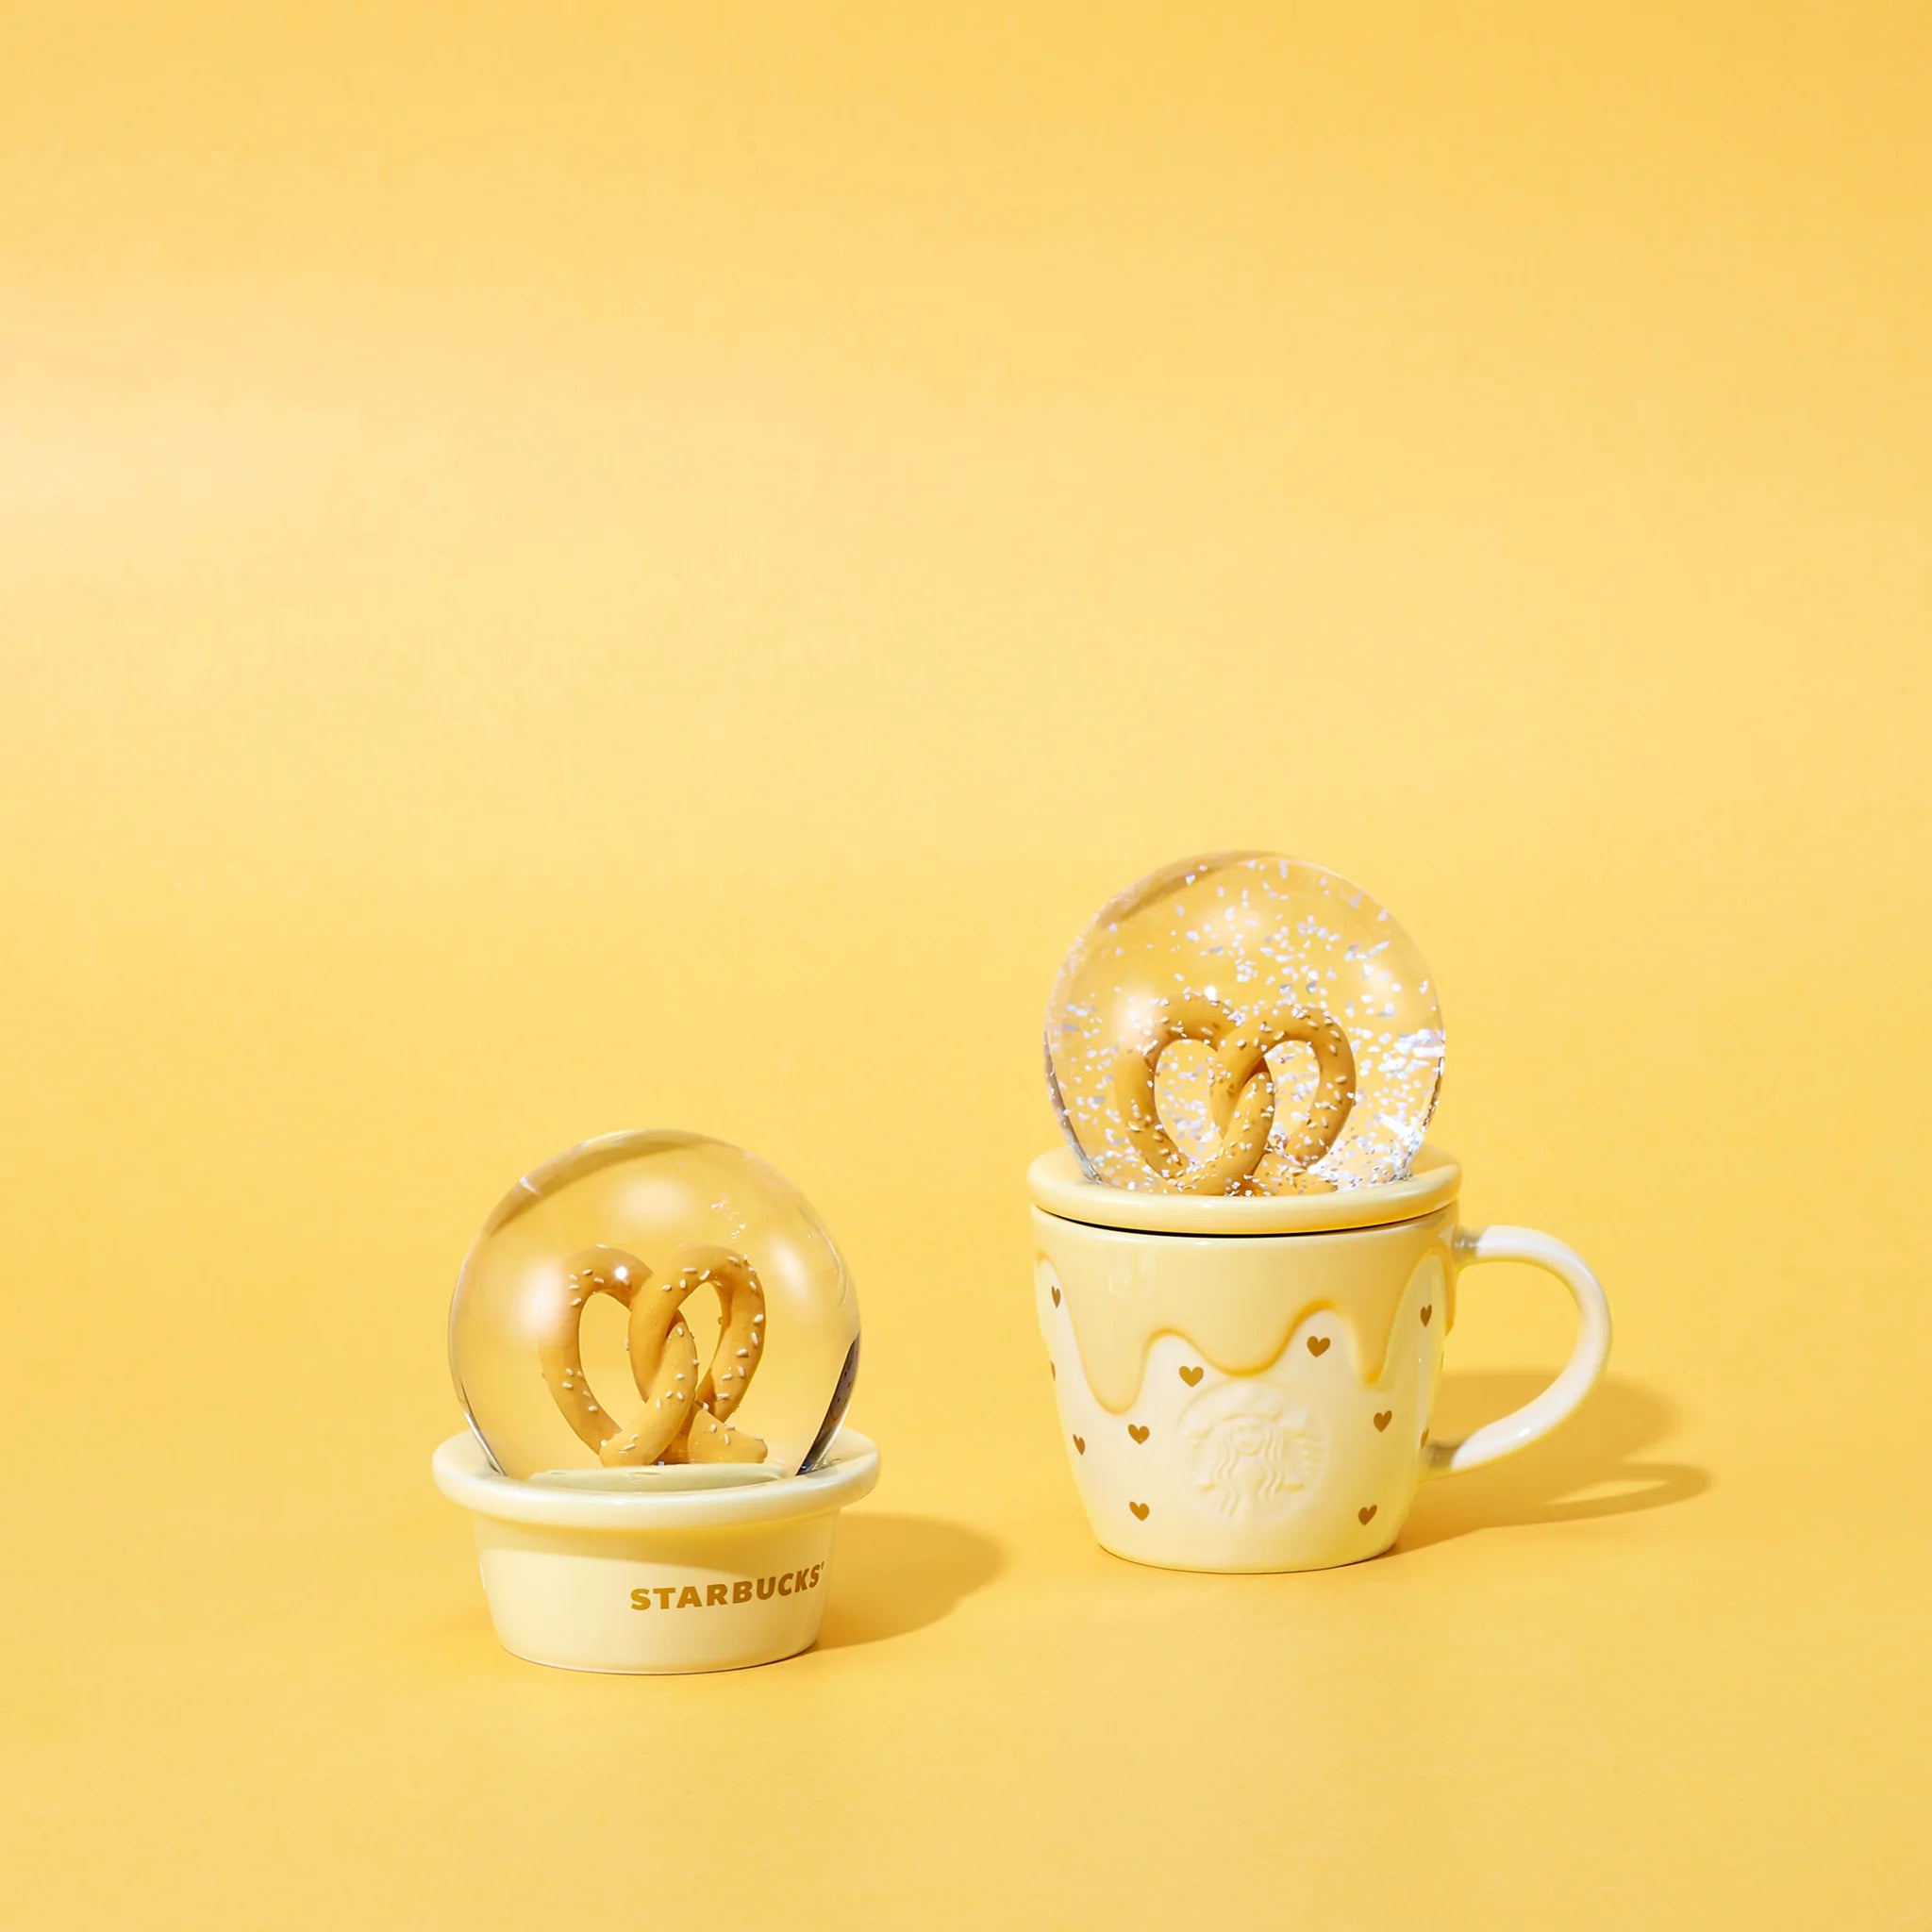 Starbucks Butter Together Collection Celebrates Valentine's Day